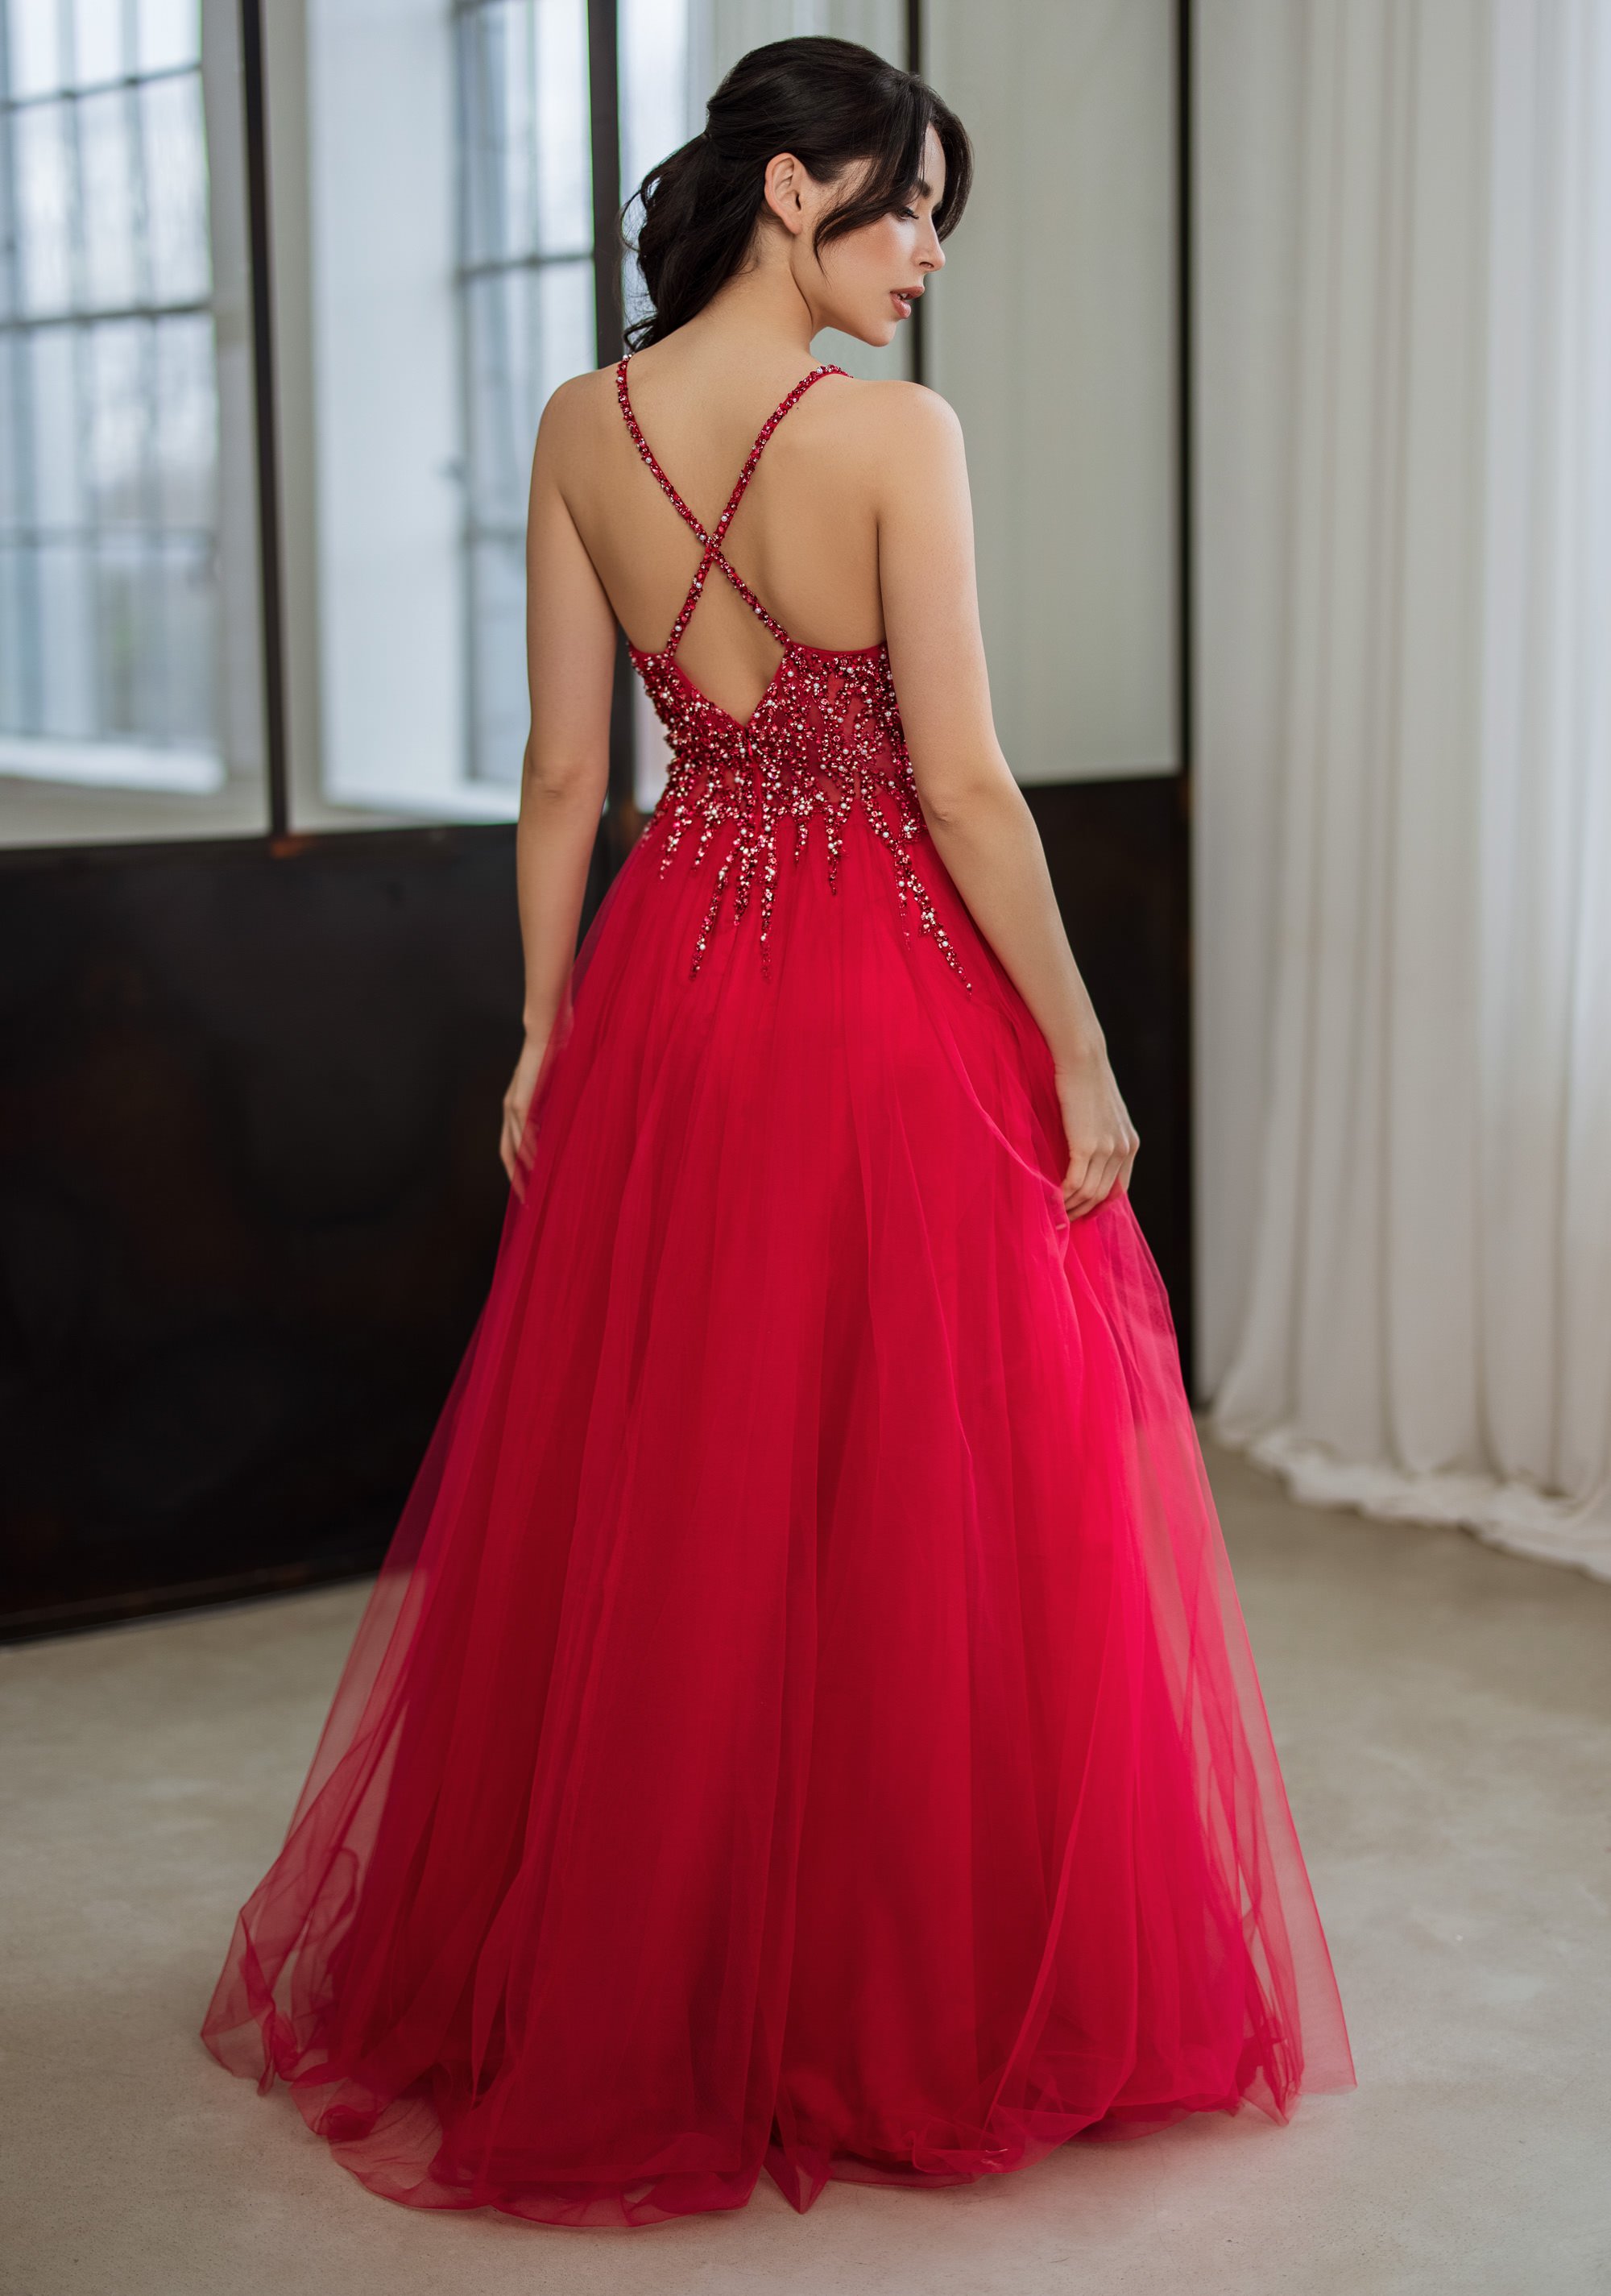 evening-dress-made-of-tulle-in-cherry-red (1).jpg